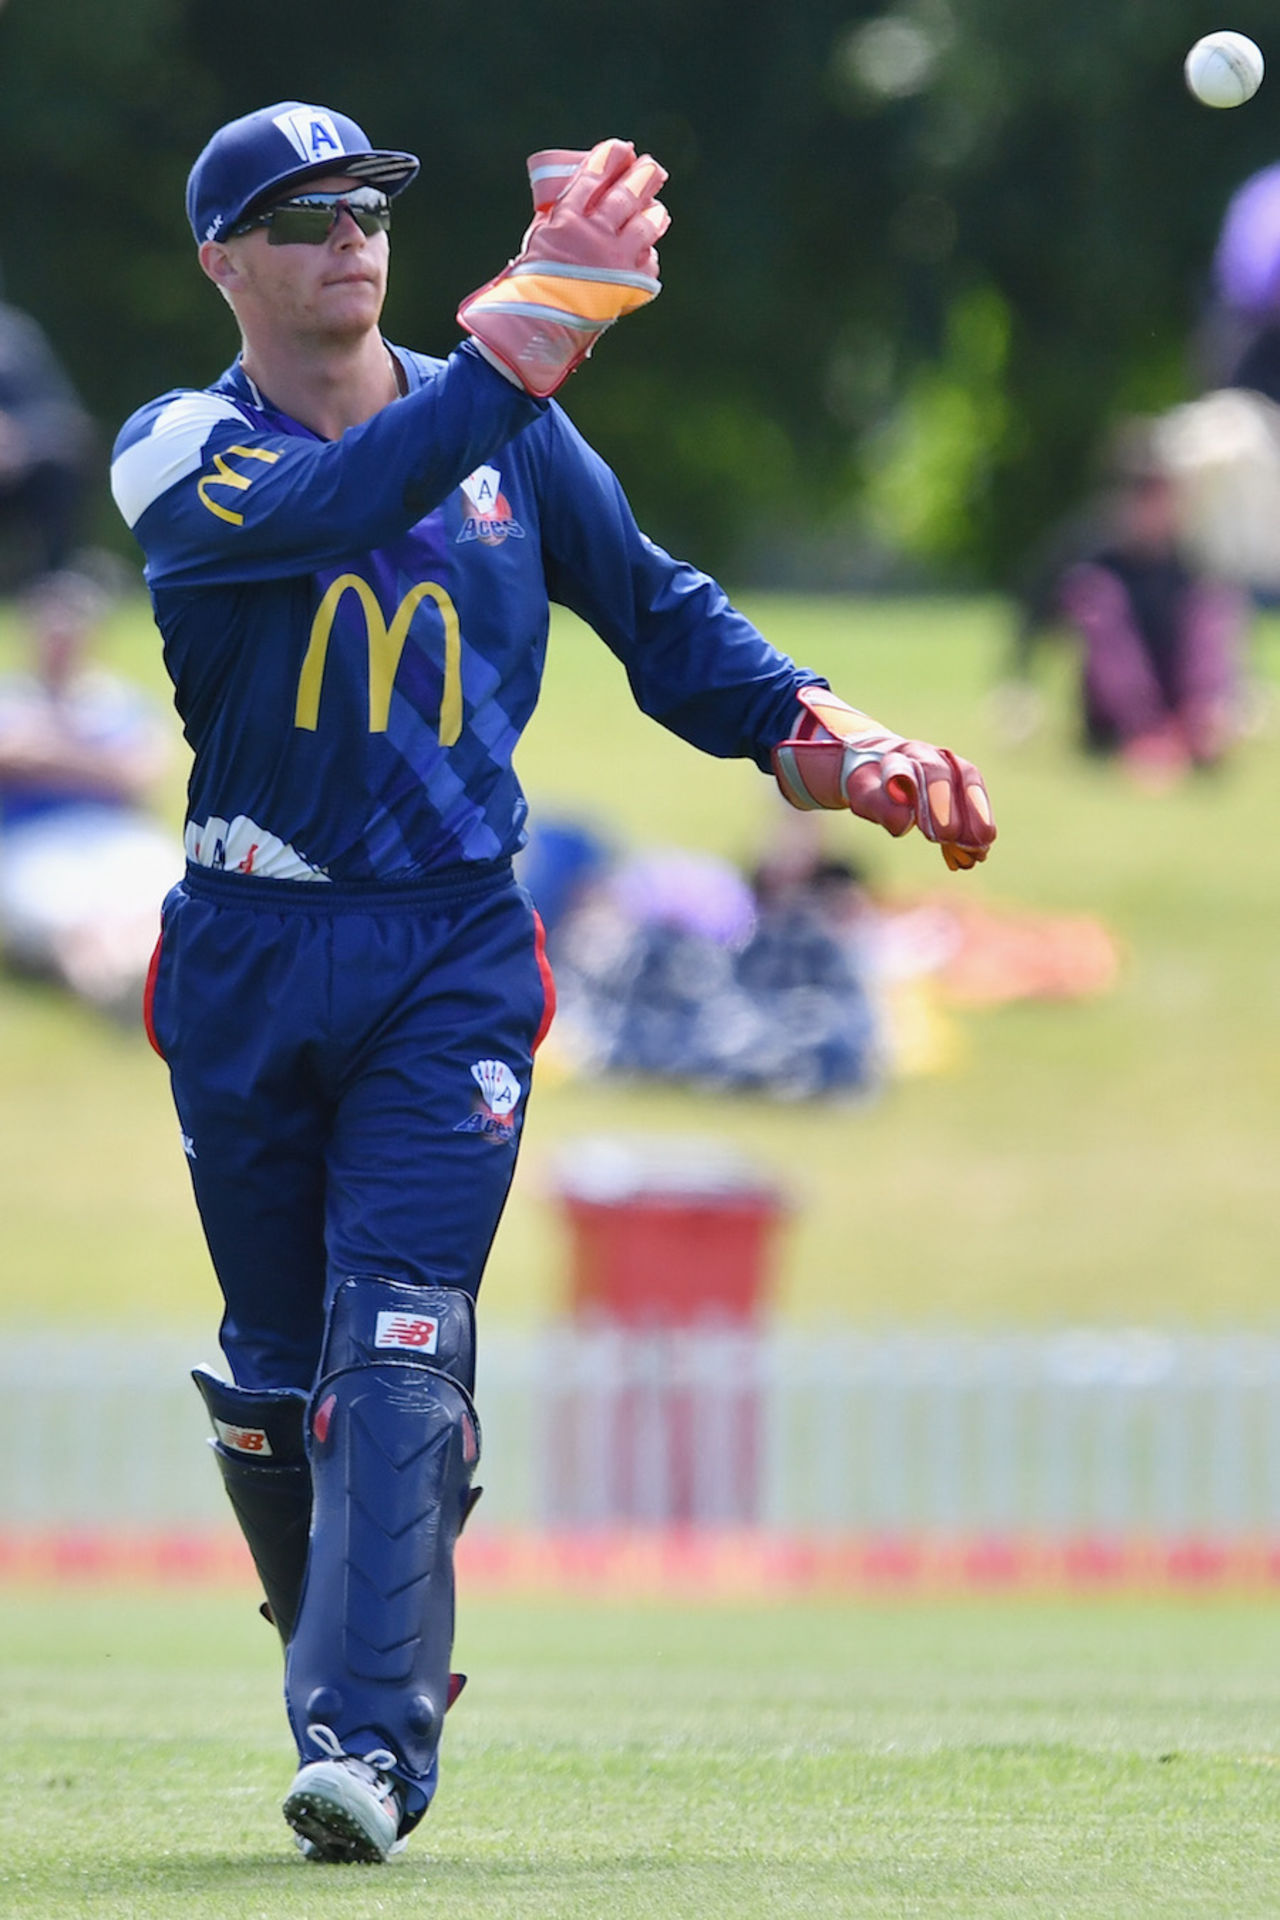 Glenn Phillips with the gloves, Canterbury Kings v Auckland Aces, Super Smash, Christchurch, December 11, 2016